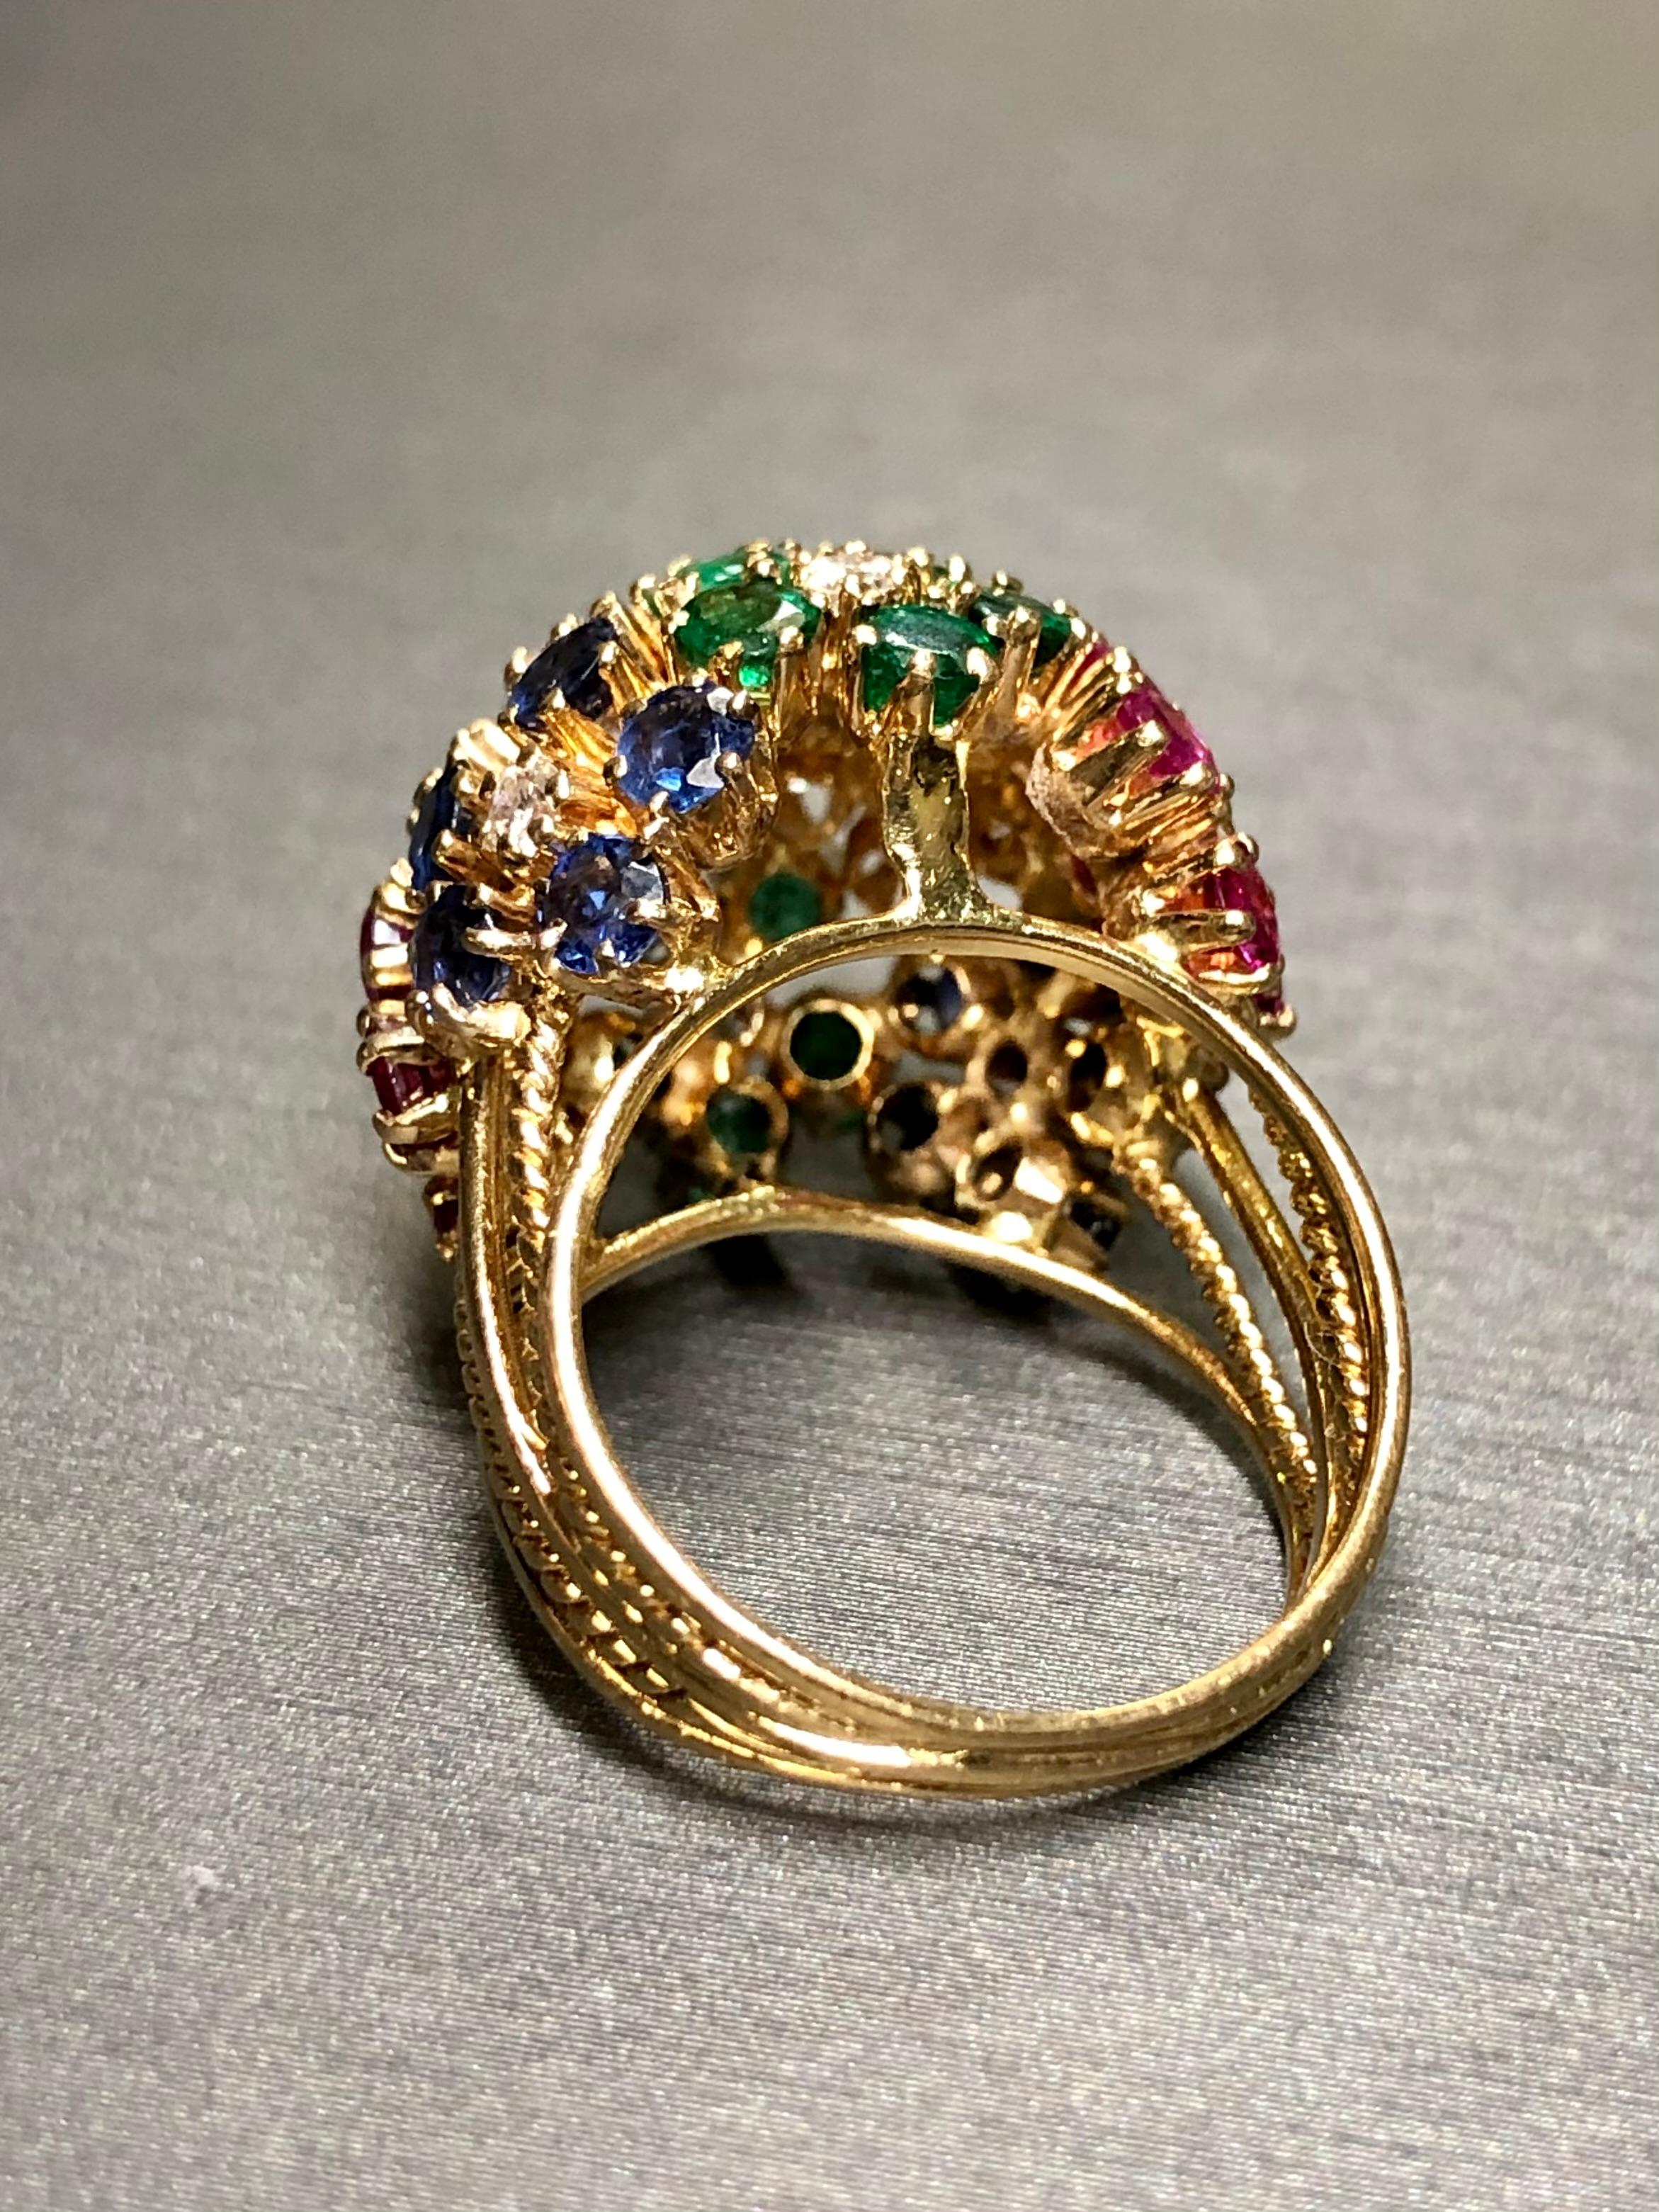 Vintage 18K Diamond Ruby Sapphire Emerald Bombe Ball Cocktail Ring 5cttw In Good Condition For Sale In Winter Springs, FL